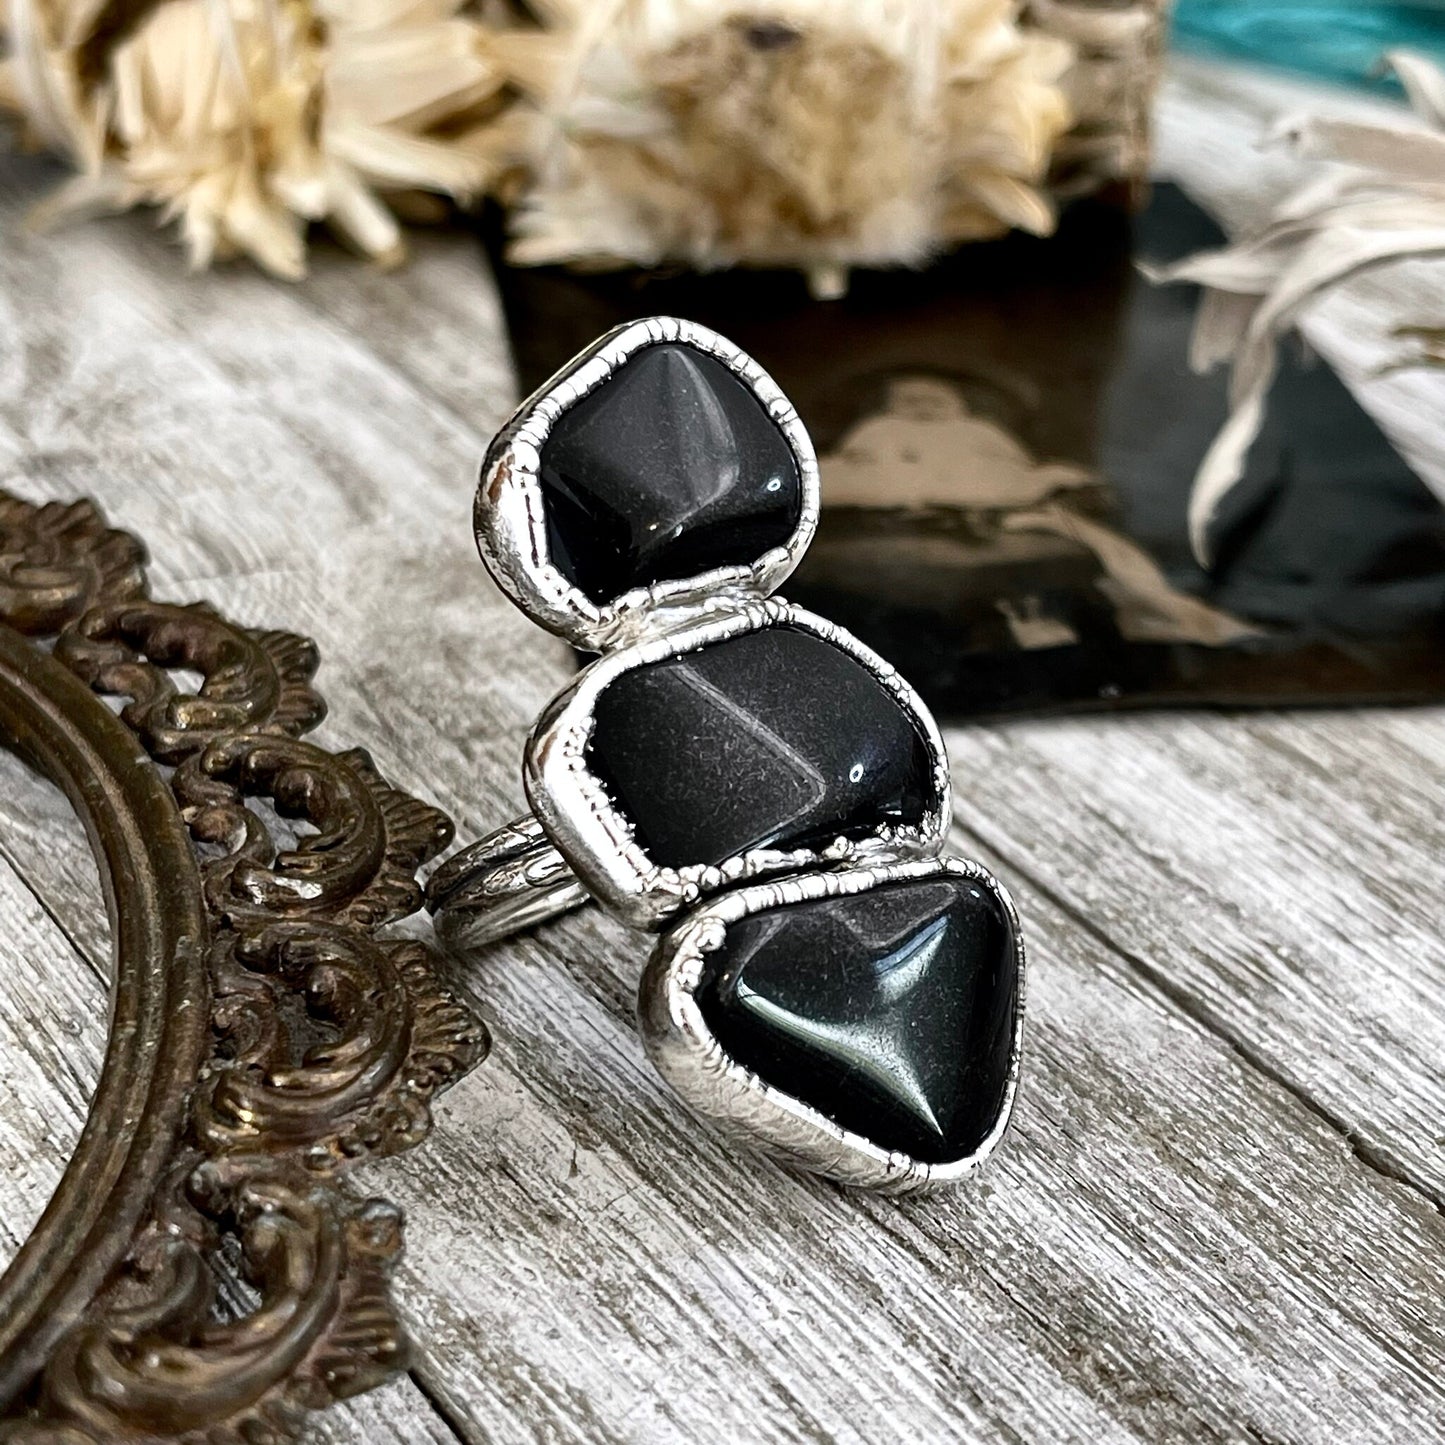 Size 8 Crystal Ring - Three Stone Ring Black Onyx Ring in Silver / Foxlark Collection - One of a Kind / Big Crystal Jewelry Goth Witchy Ring